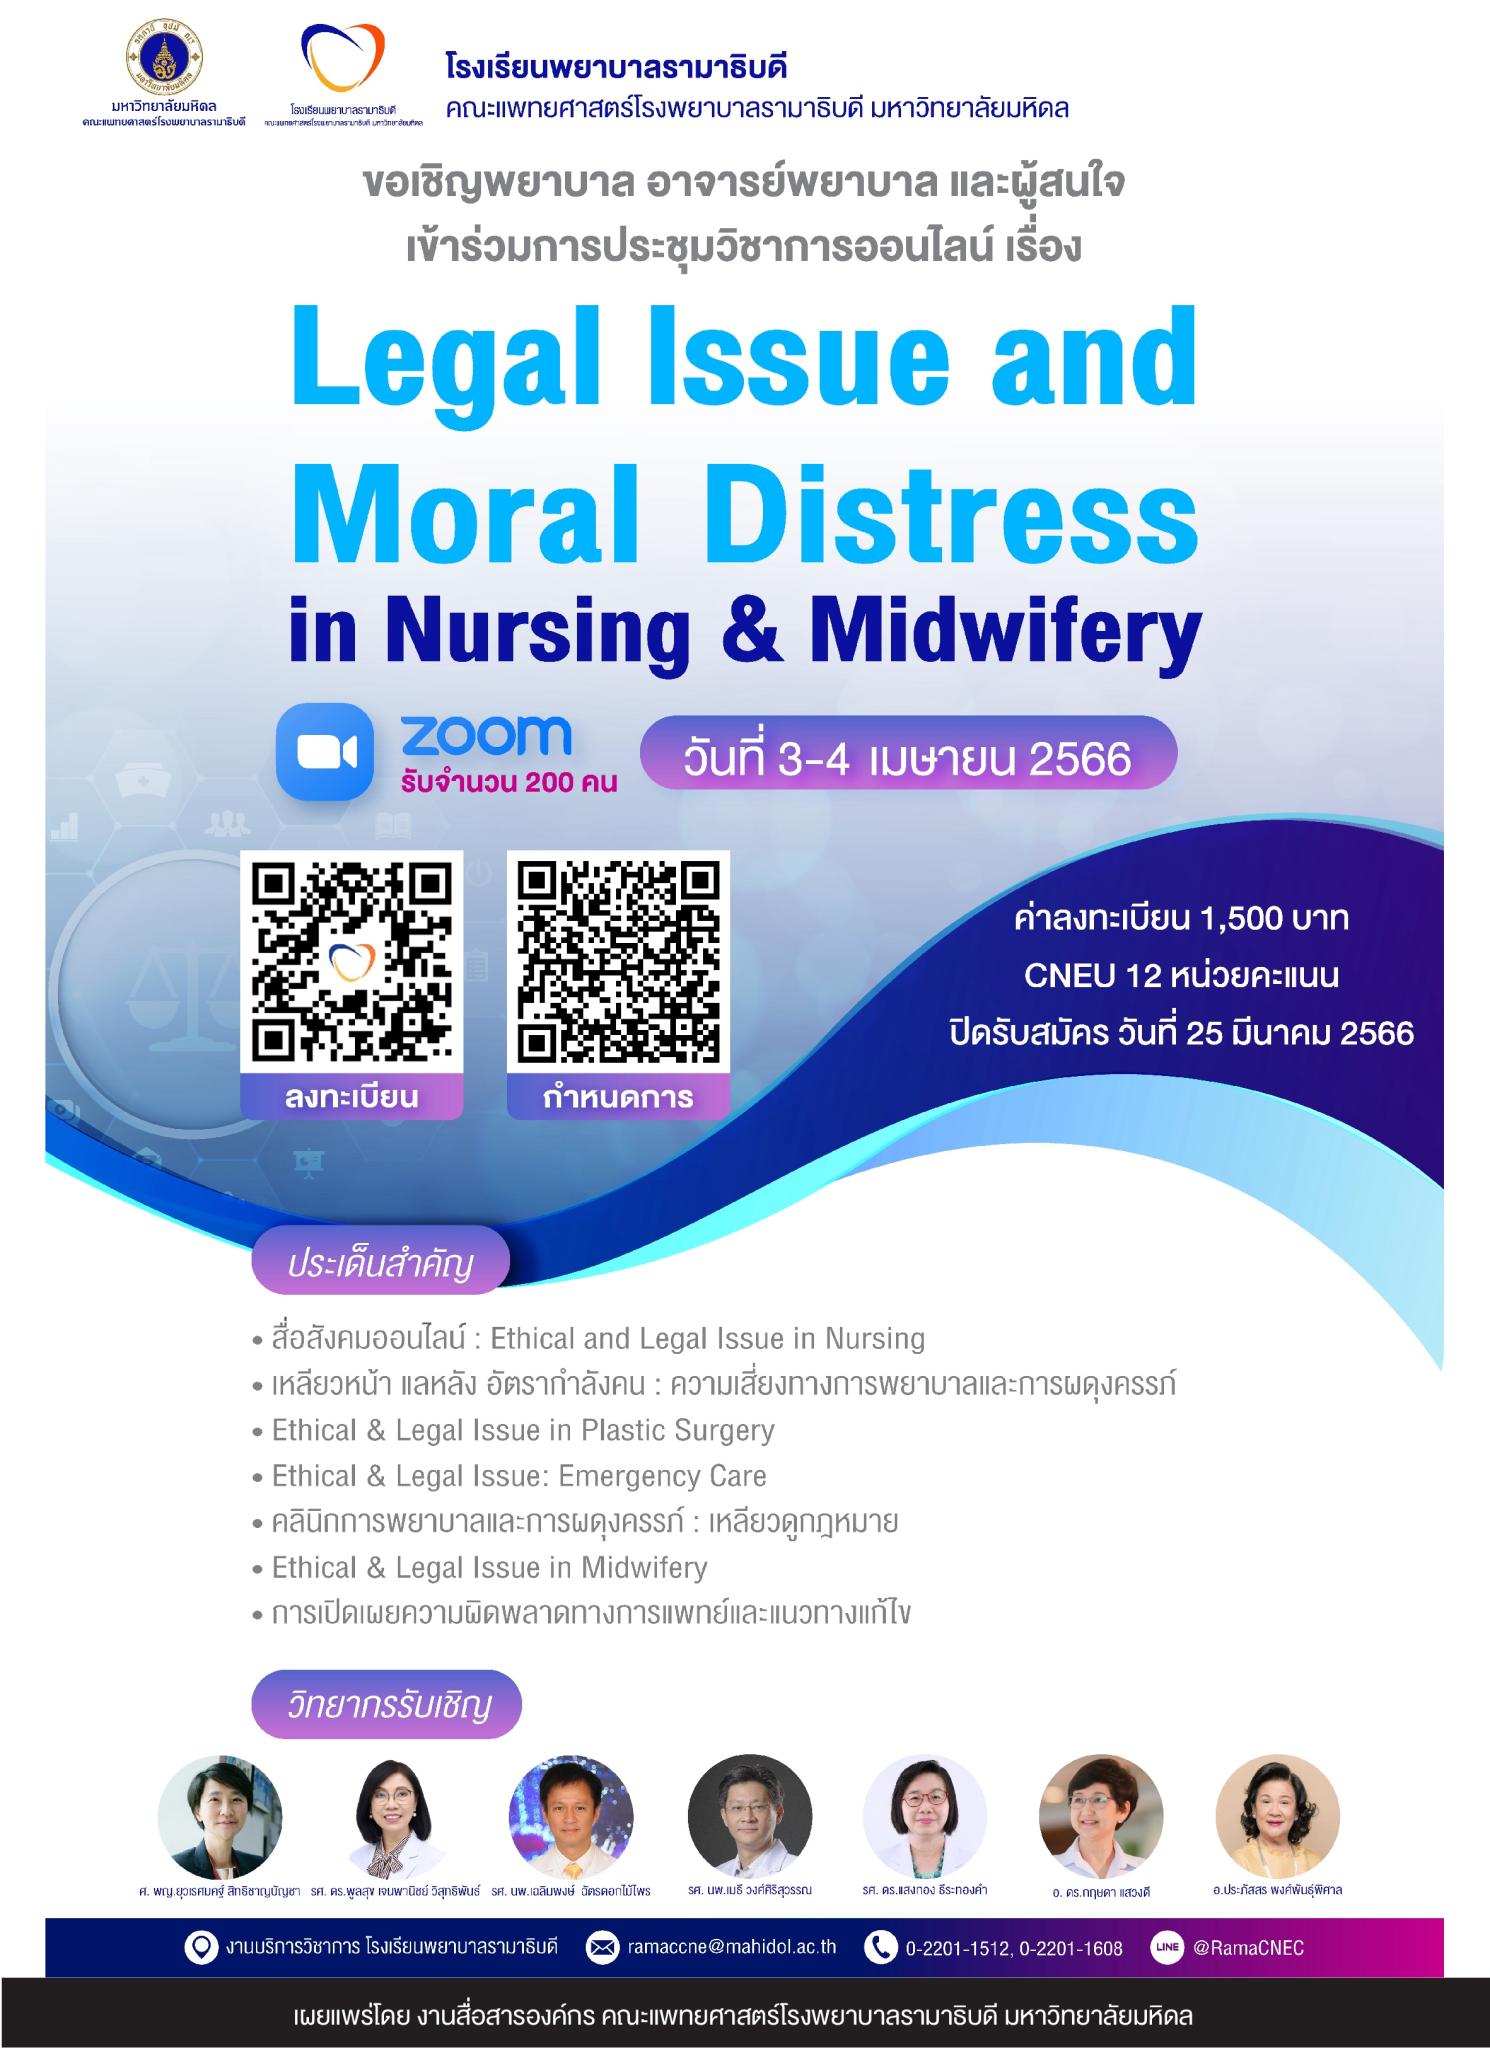 Legal Issue and Moral Distress in Nursing & Midwifery